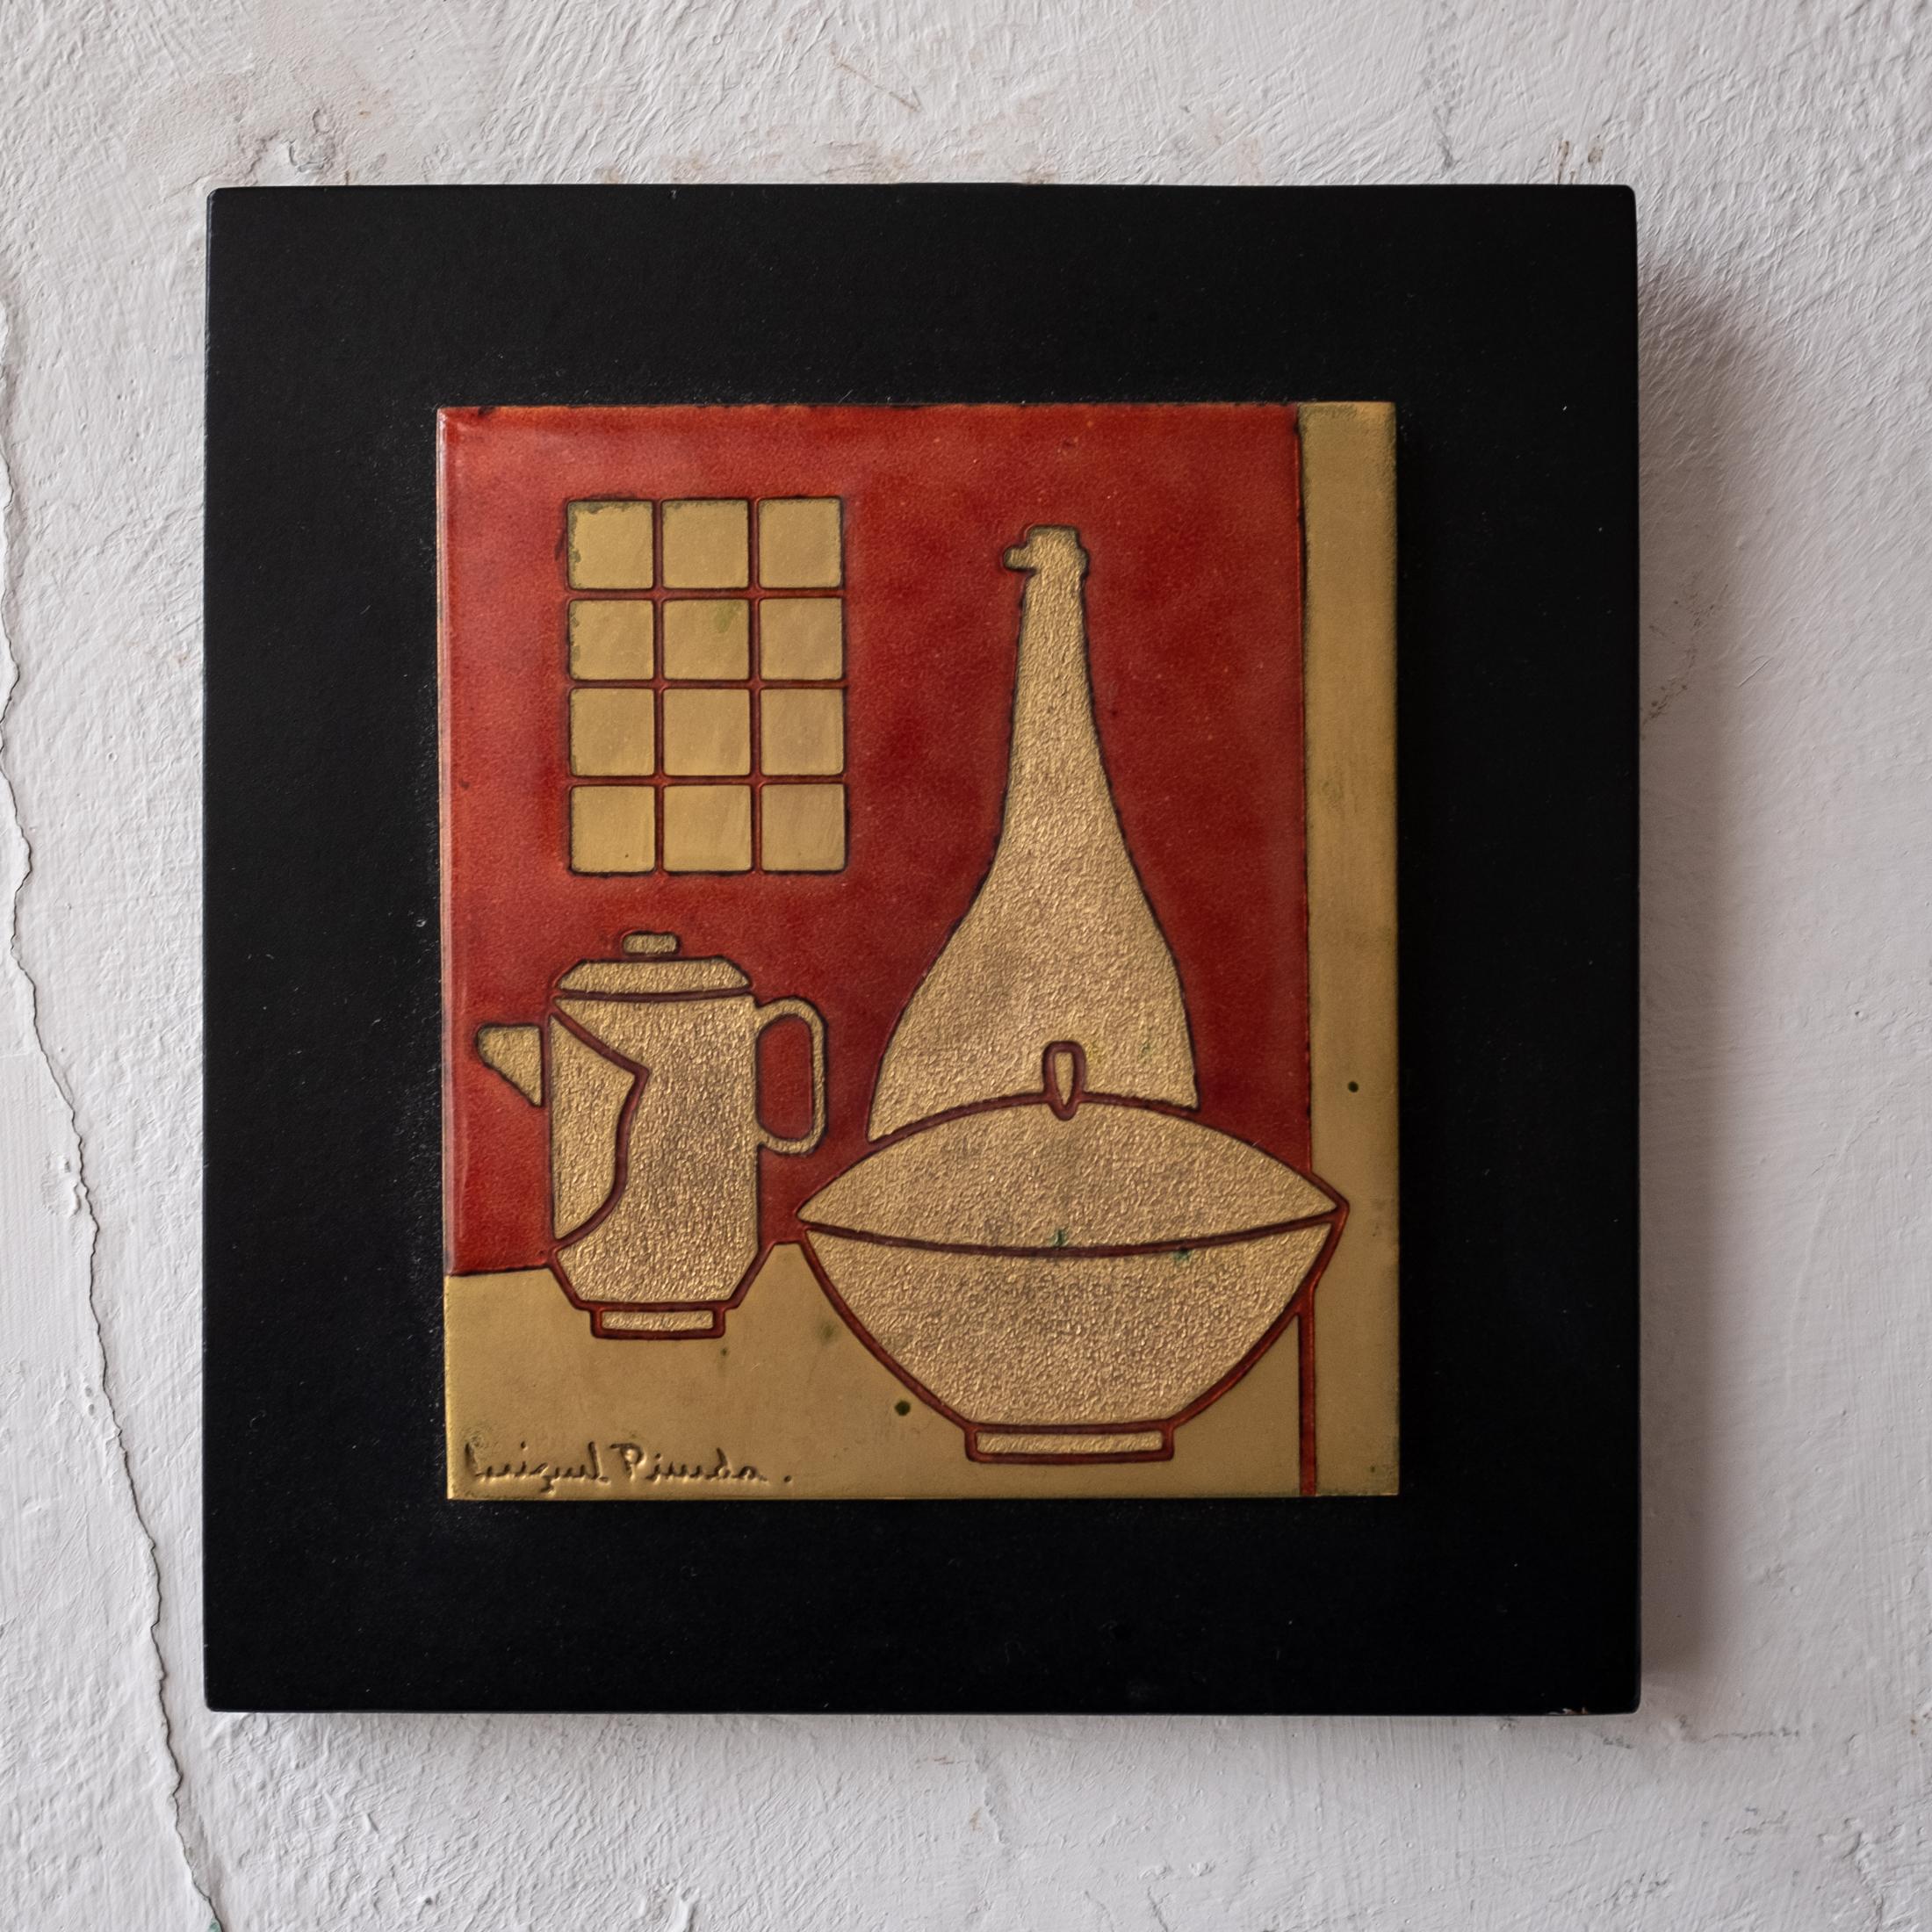 Enamel plaque by Mexican artist Miguel Pineda. This abstract still life is signed on the front and it retains an original gallery tag on the back. 

Hailing from Mexico City, Pineda studied under artist Maggie Howe. He is now regarded as an